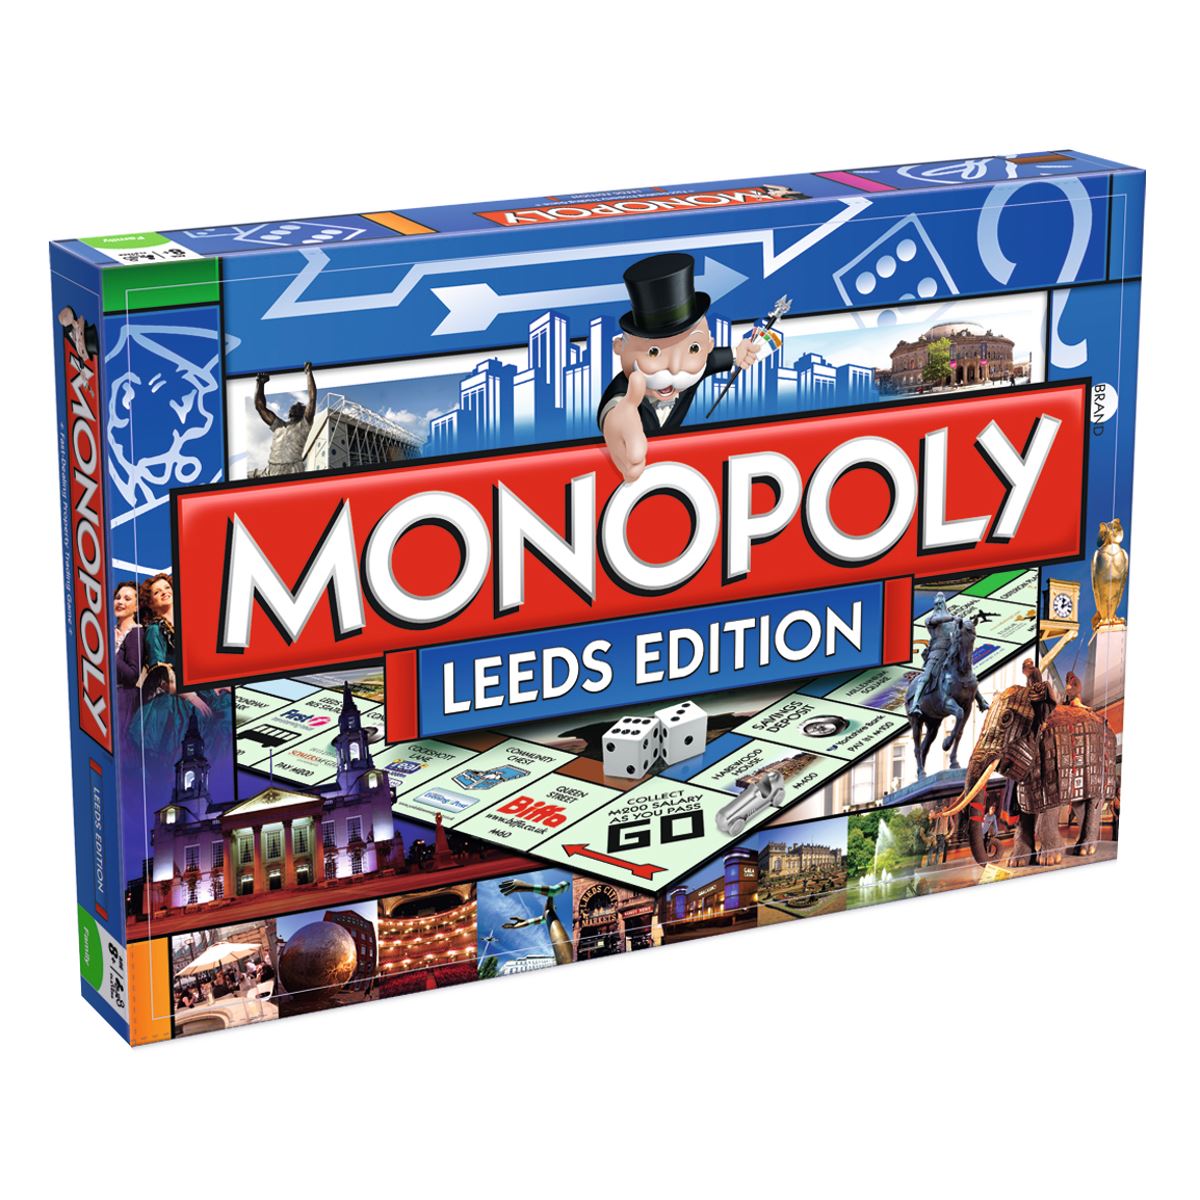 Monopoly Leeds Edition Board Game - The Great Yorkshire Shop